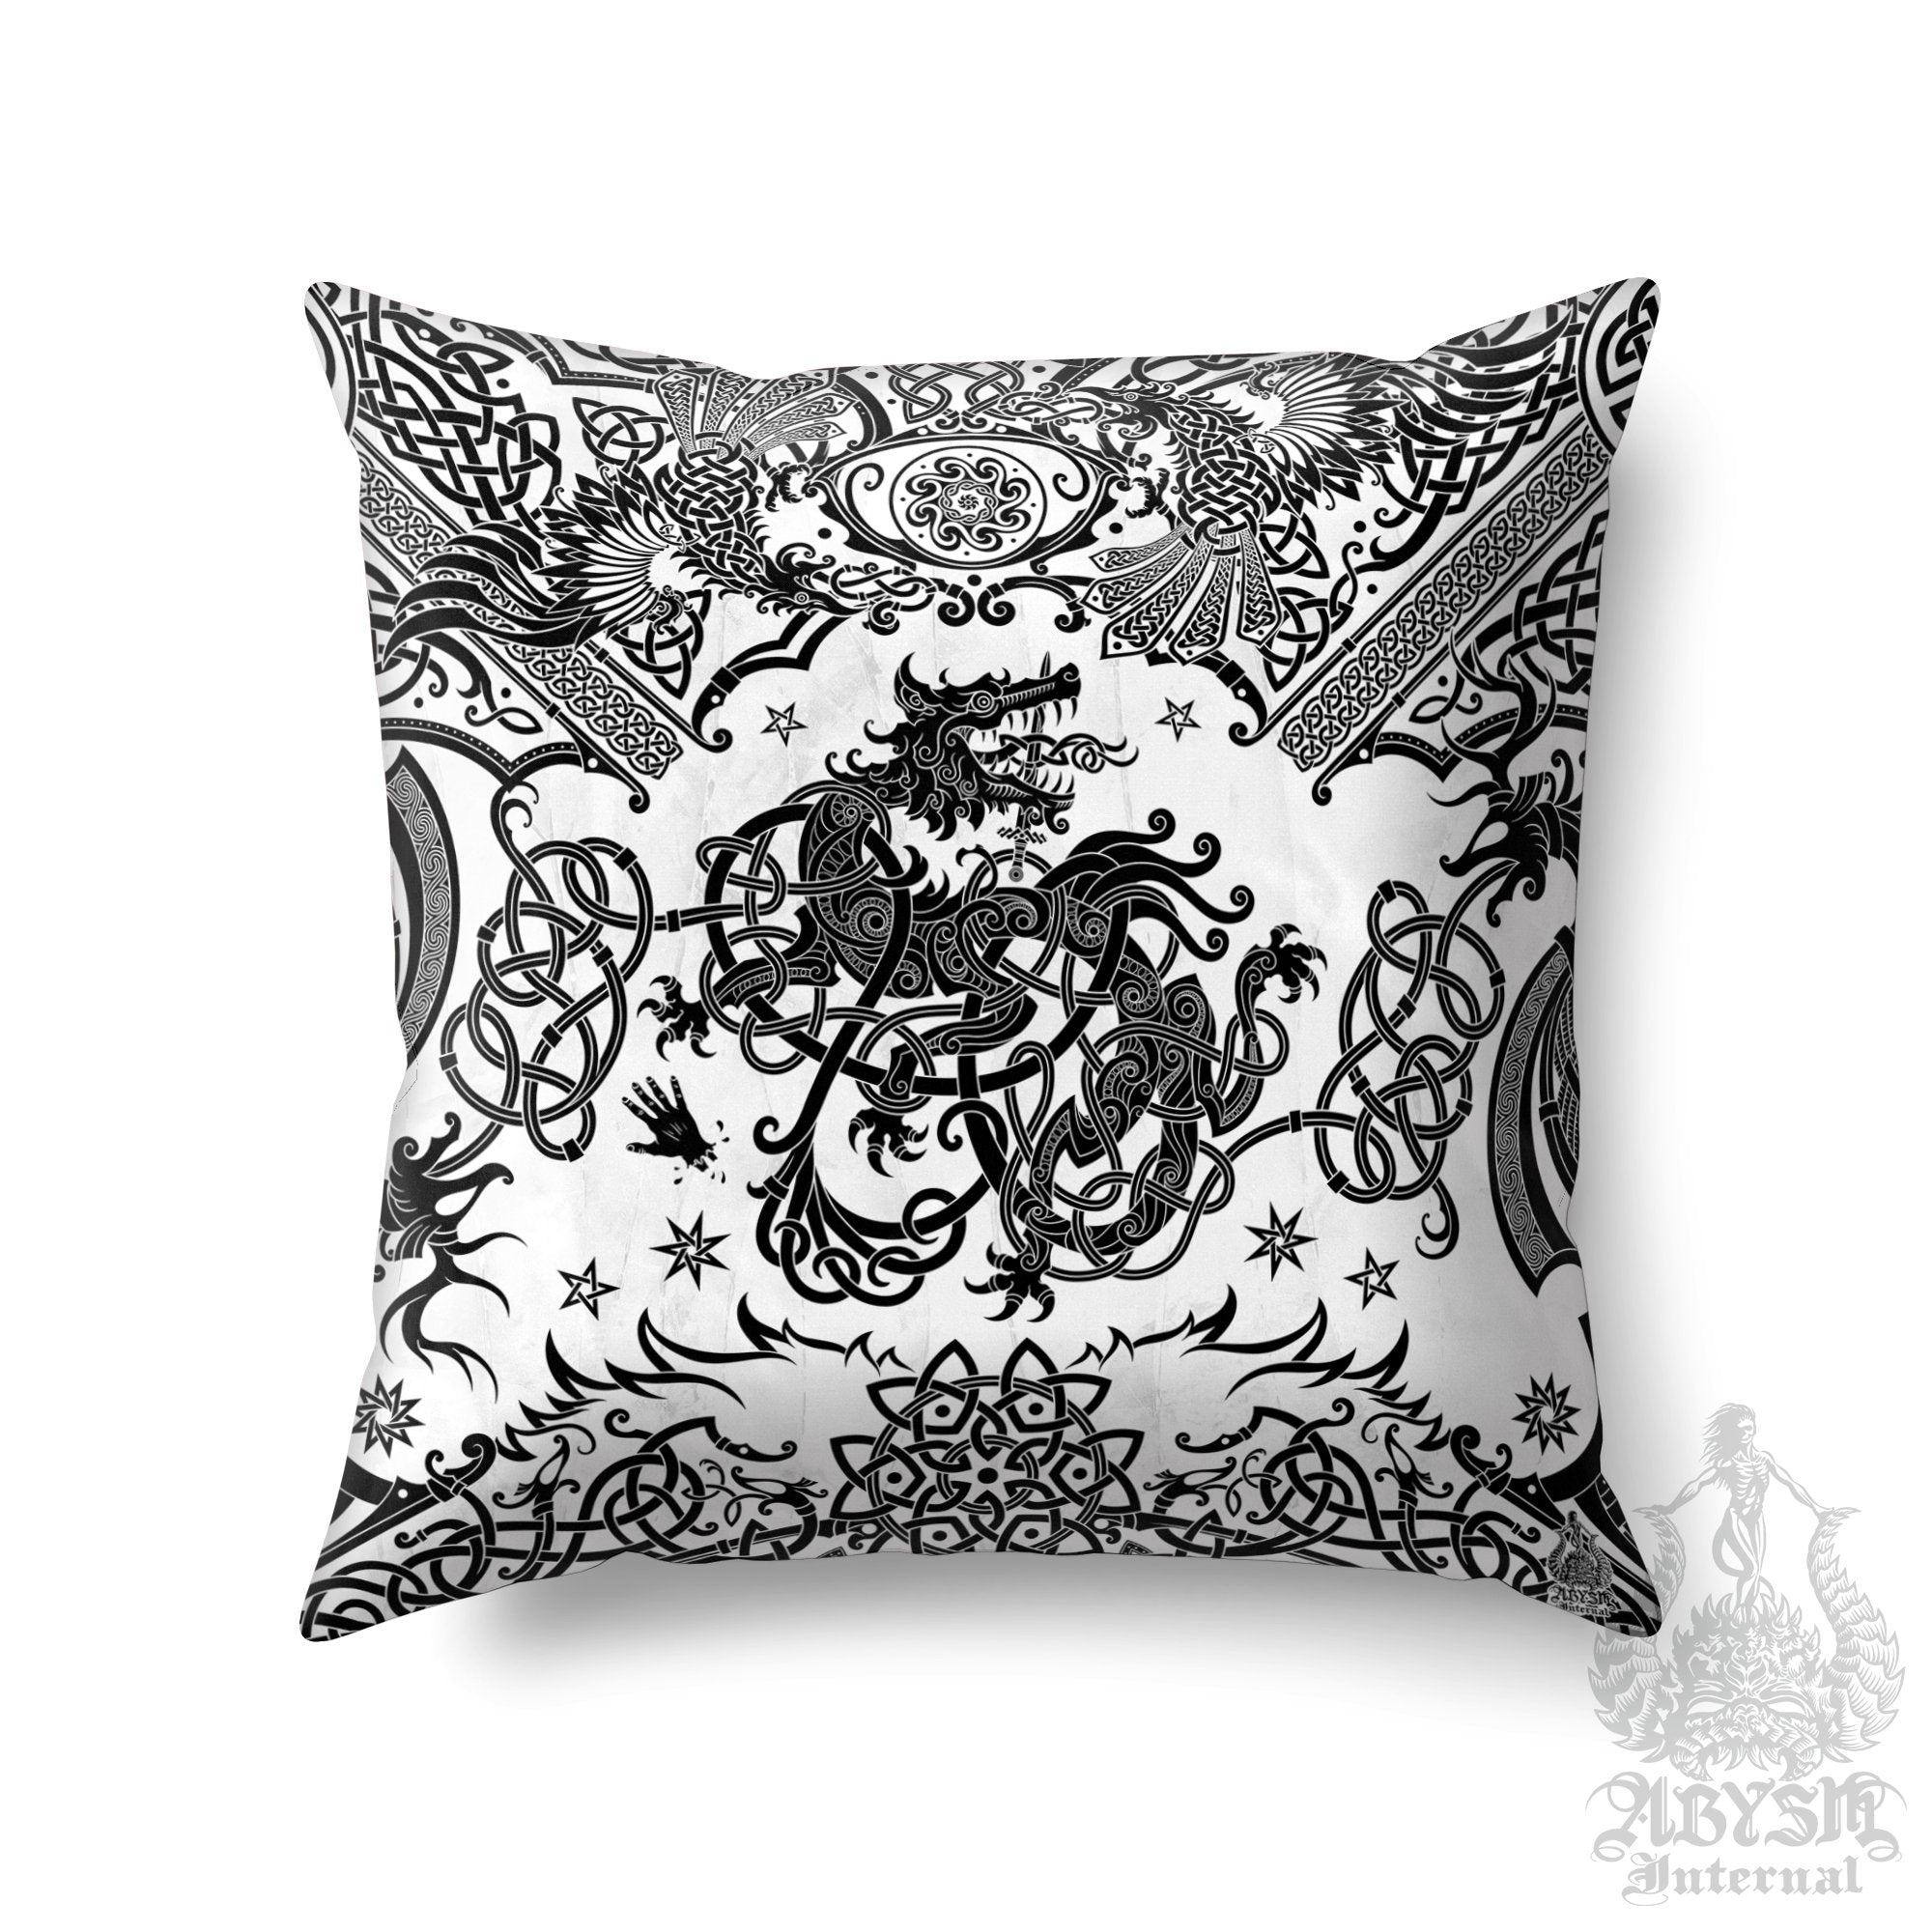 Norse Art Throw Pillow, Decorative Accent Pillow, Square Cushion Cover, Viking Room Decor, Fenrir Knotwork Art, Nordic Wolf, Alternative Home - Black and White - Abysm Internal